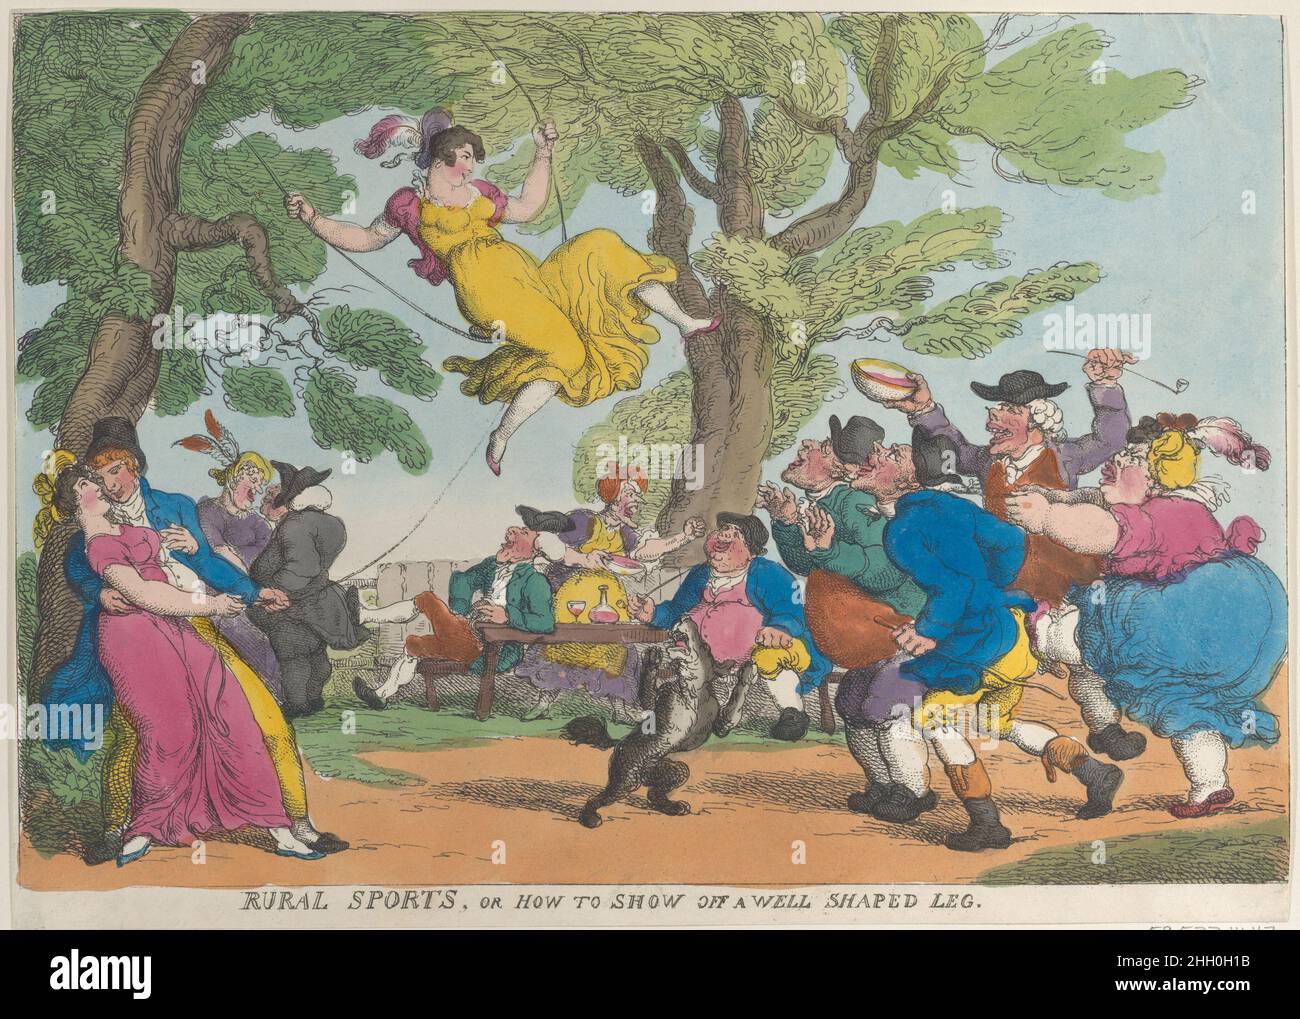 Rural Sports, or How to Show Off a Well Shaped Leg October 1811 Thomas Rowlandson A young woman swings high above the heads of the spectators, seated on a rope swing hung between two trees, while various spectators watch.. Rural Sports, or How to Show Off a Well Shaped Leg. Thomas Rowlandson (British, London 1757–1827 London). October 1811. Hand-colored etching. Thomas Tegg (British, 1776–1846). Prints Stock Photo